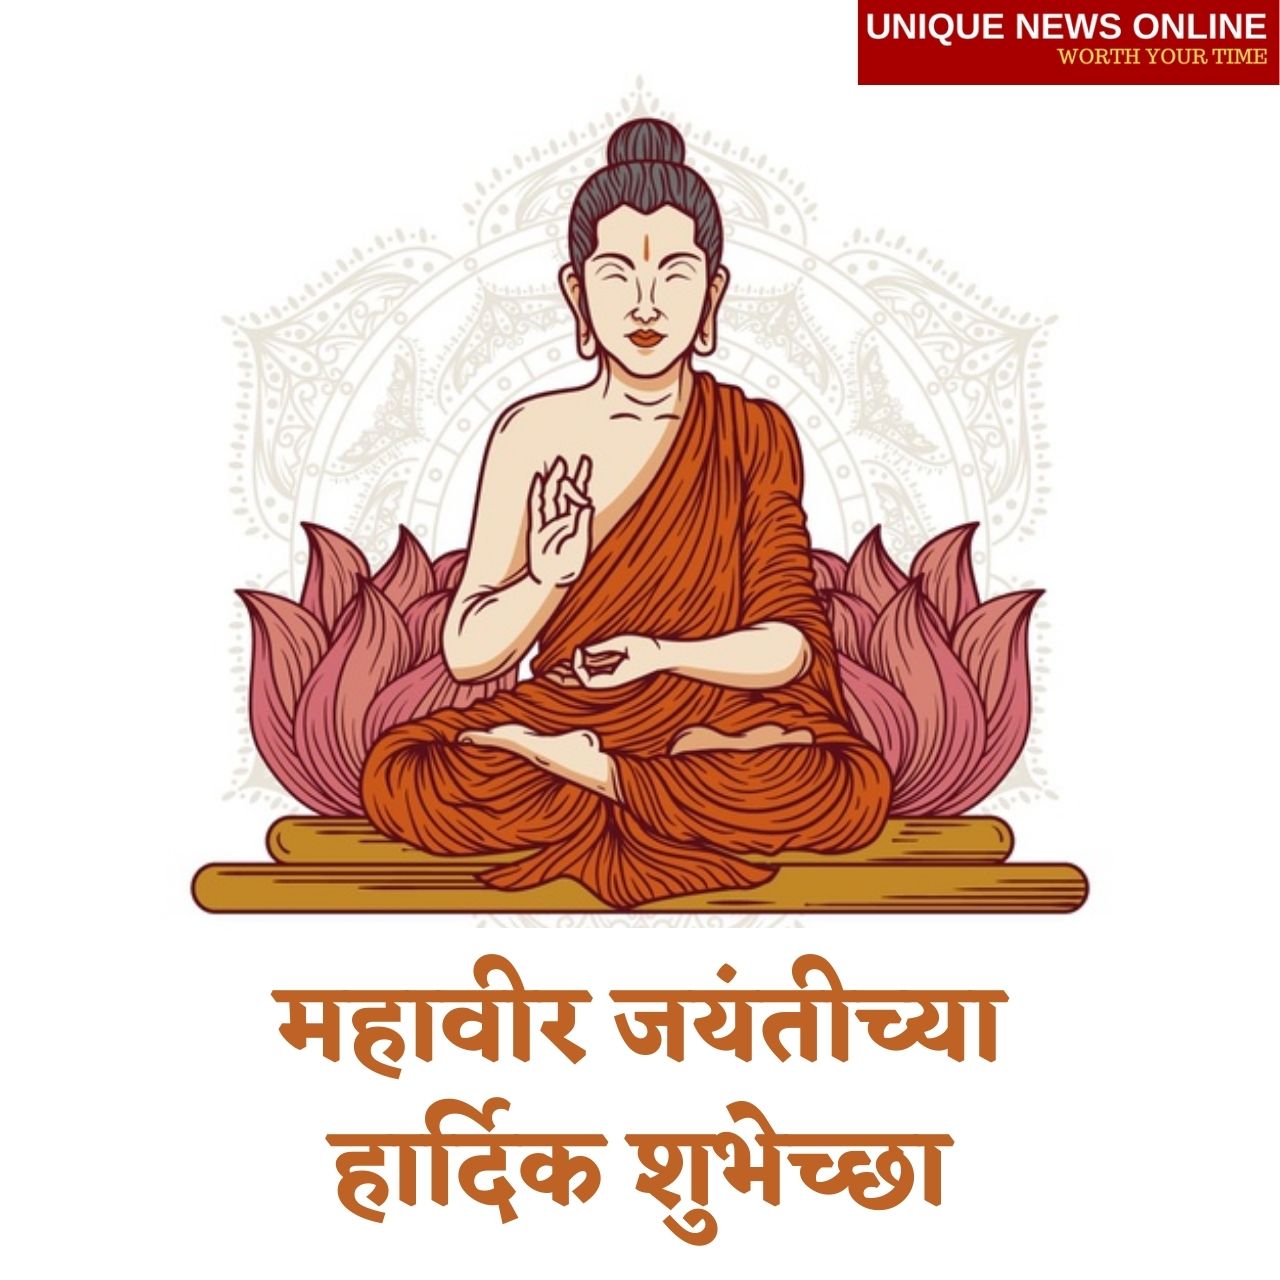 Happy Mahavir Jayanti 2021 Wishes in Marathi, Messages, Greetings, Quotes, and Images to Share